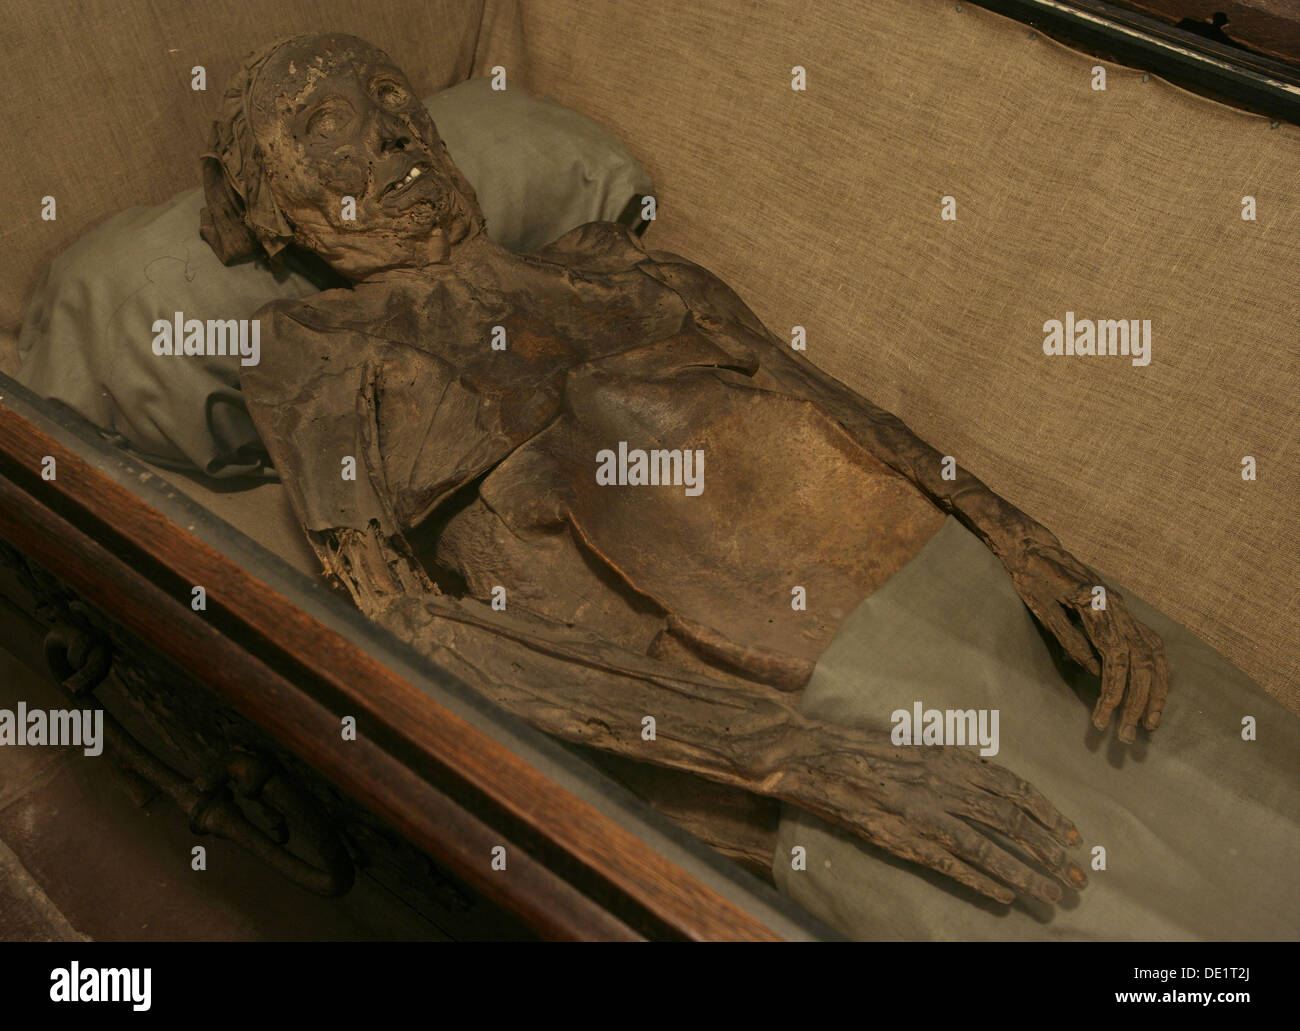 (dpa FILE) - An archive picture, dated 10 April 2006, shows the mummified remains Maria of Engelbrechten, nee Mevius, the wife of chancellor of the former duchies of Bremen-Verden, G. B. of Engelbrechten,  in a wooden coffin in the so-called 'Bleikeller', underground crypt, in the basement of the Saint Petri Cathedral in Bremen, Germany. Maria of Engelbrechten died on 23 November 1734. The statue to the left represents the evangelist Luke and was crafted by German sculptor Dietrich Kropp in 1862. Despite the eery atomsphere, a tour through the crypt offers visitors an opportunity to reflect on Stock Photo